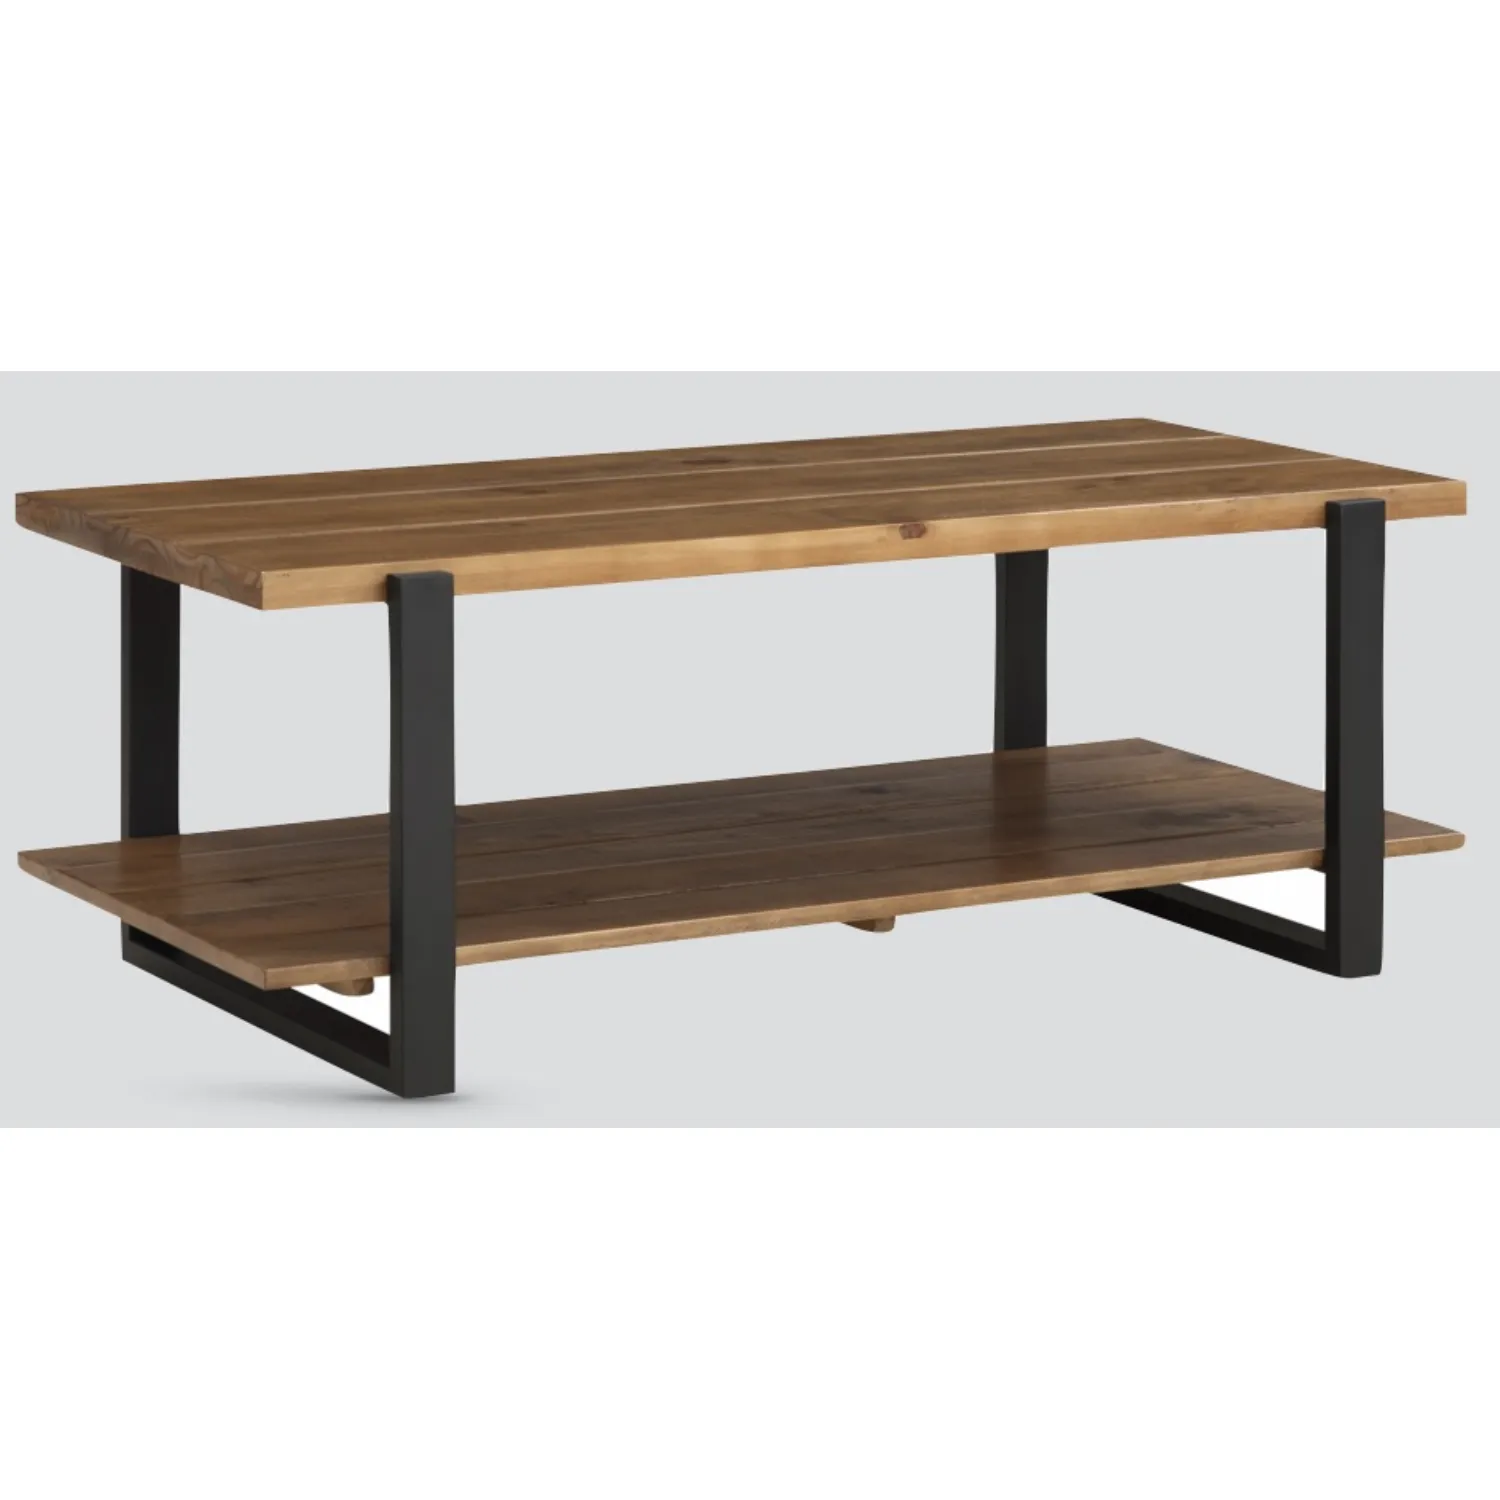 Rustic Solid Pine Coffee Table with Shelf